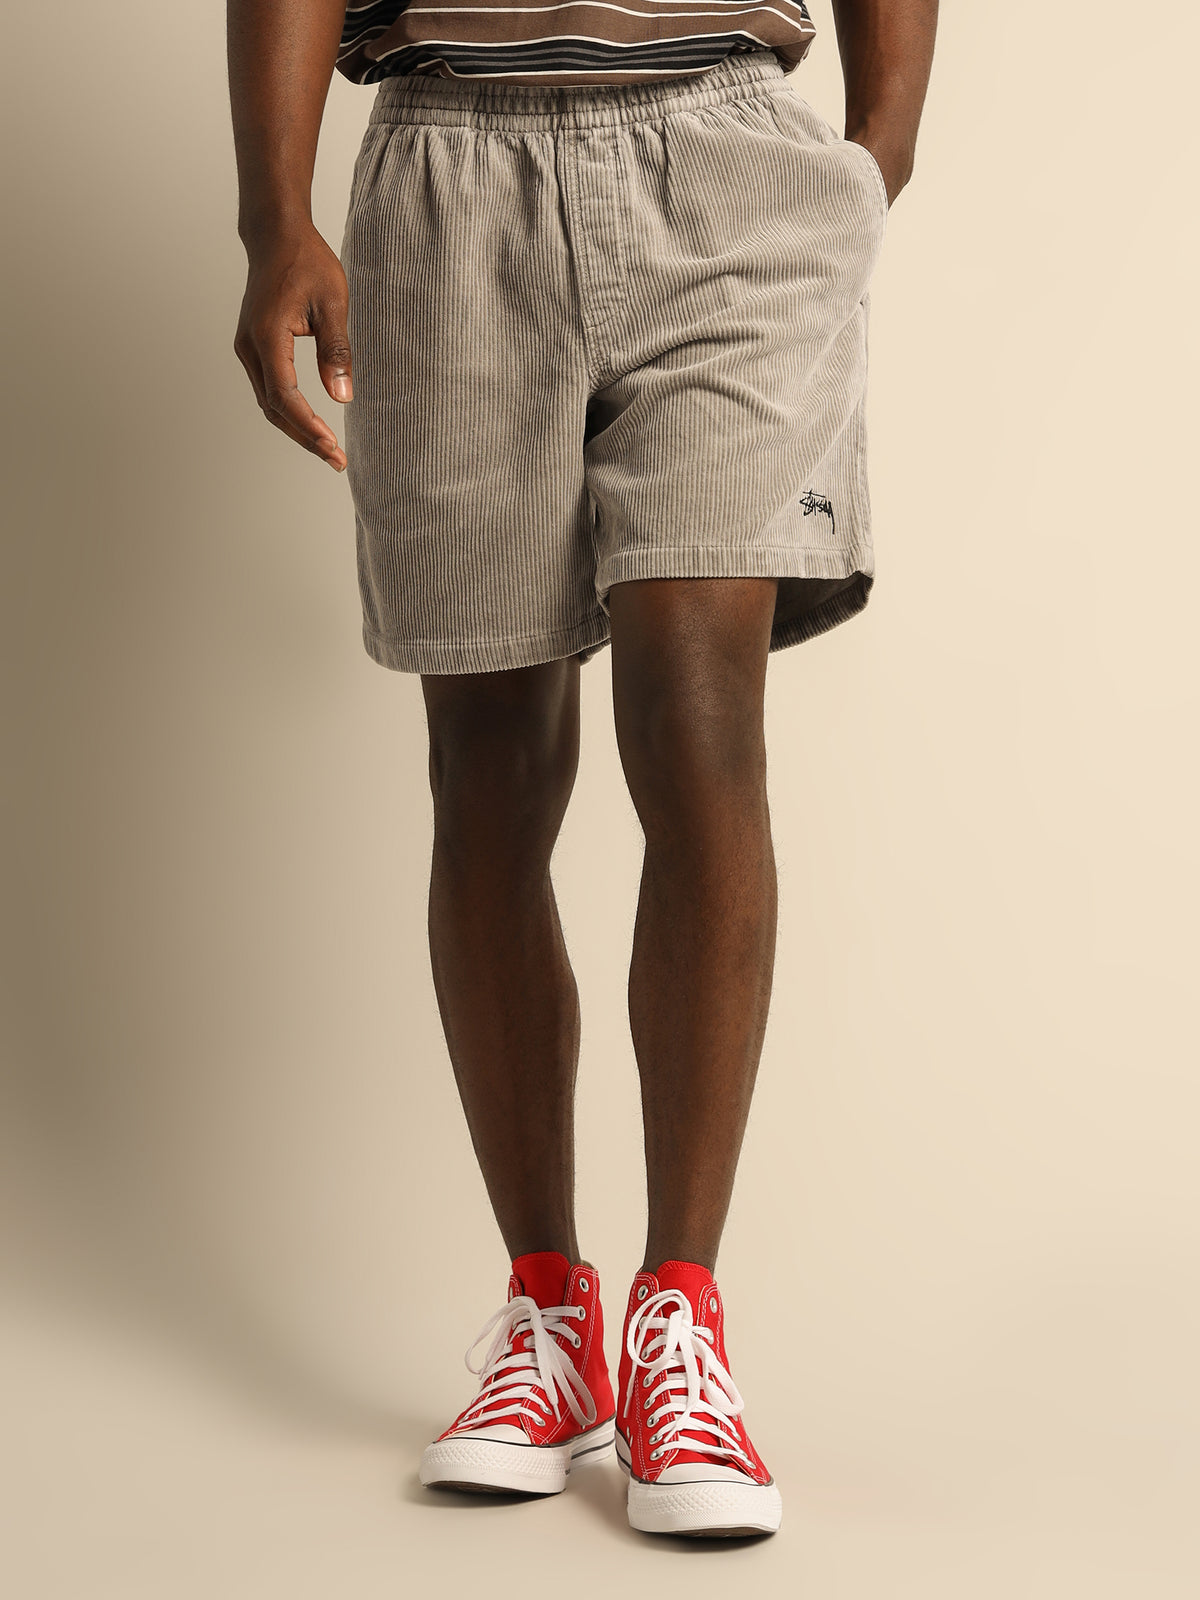 Wide Wale Cord Shorts in Atmosphere